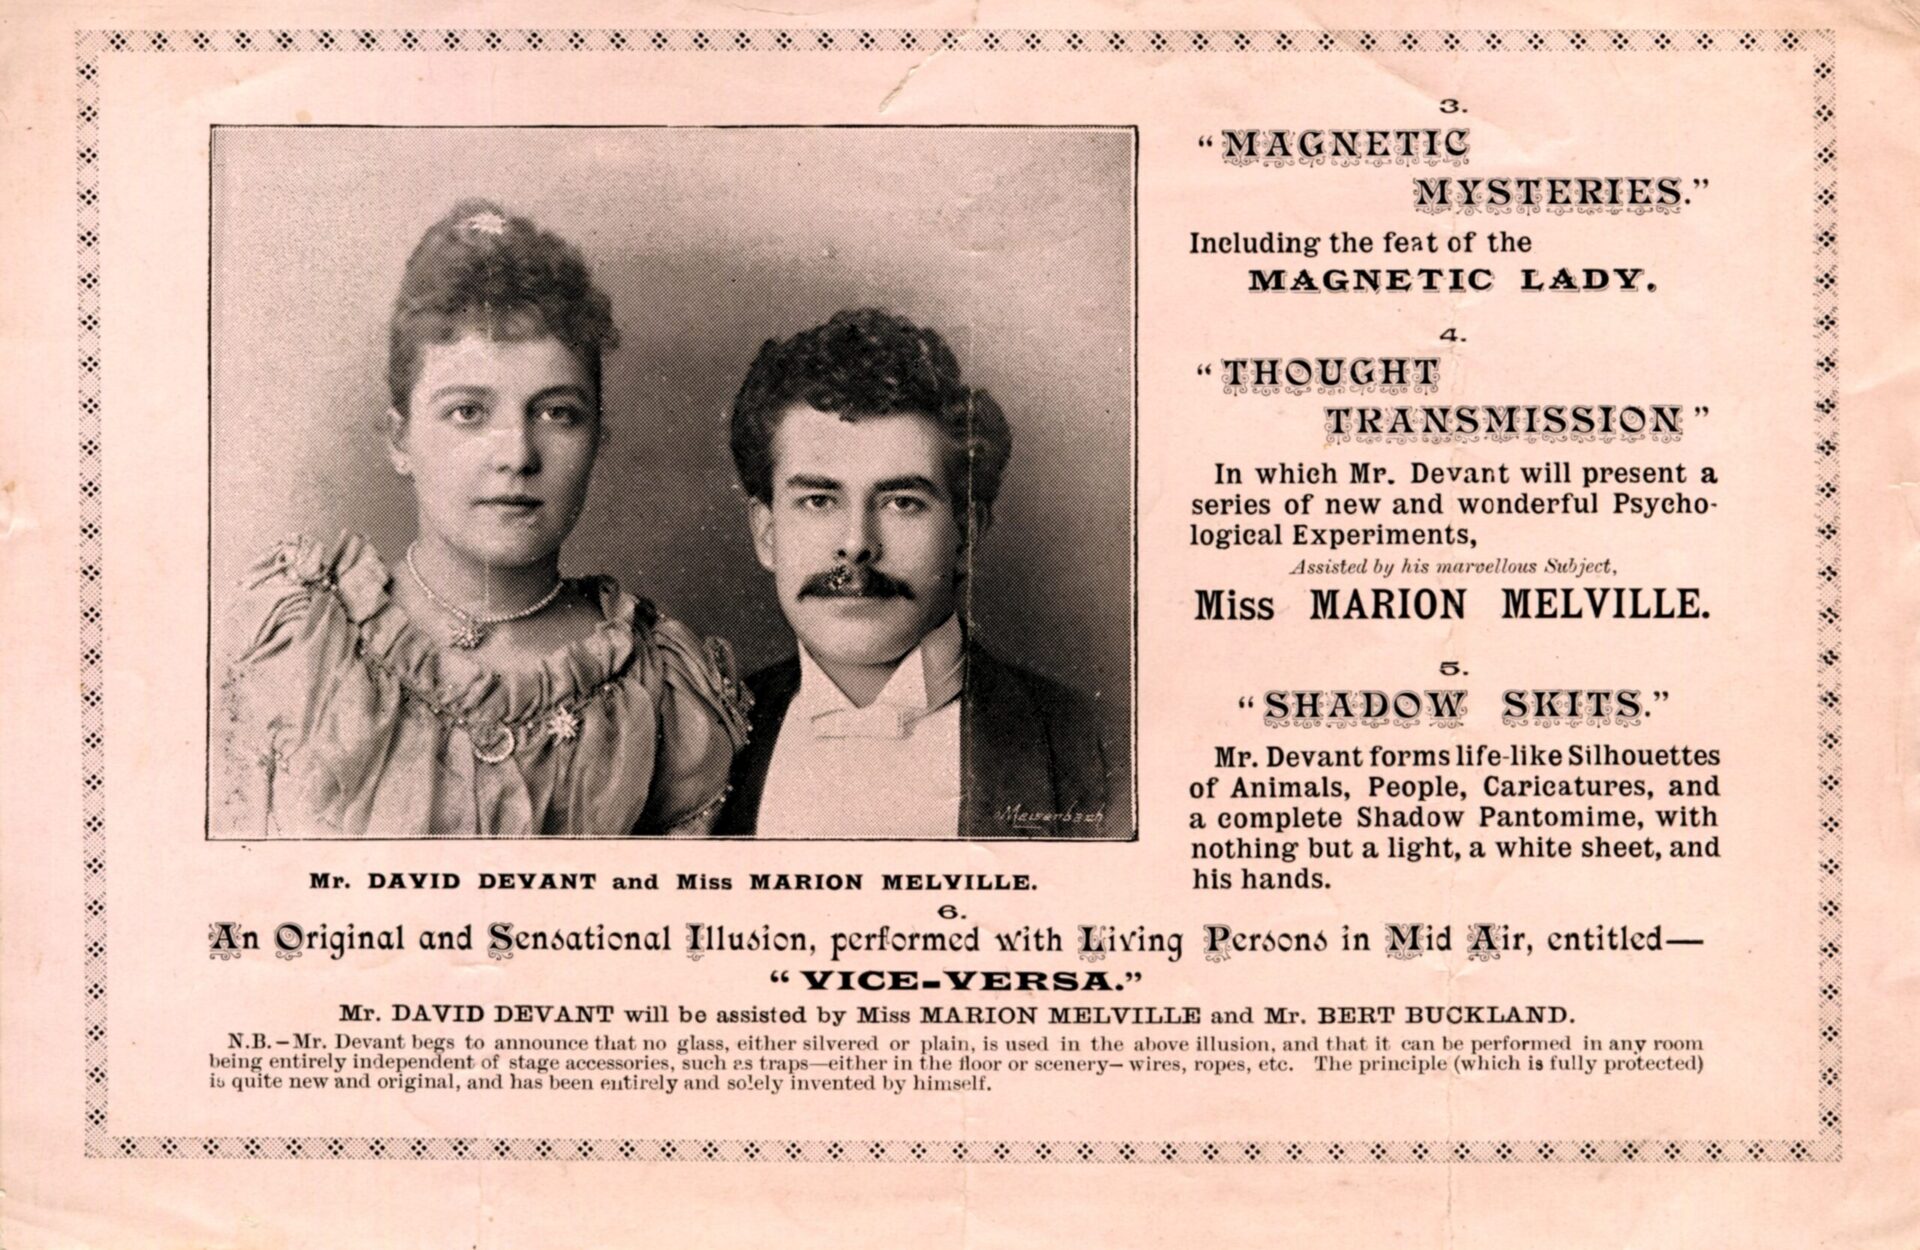 Picture of David Devant and Marion Melville with a listing of Devant’s entertainments